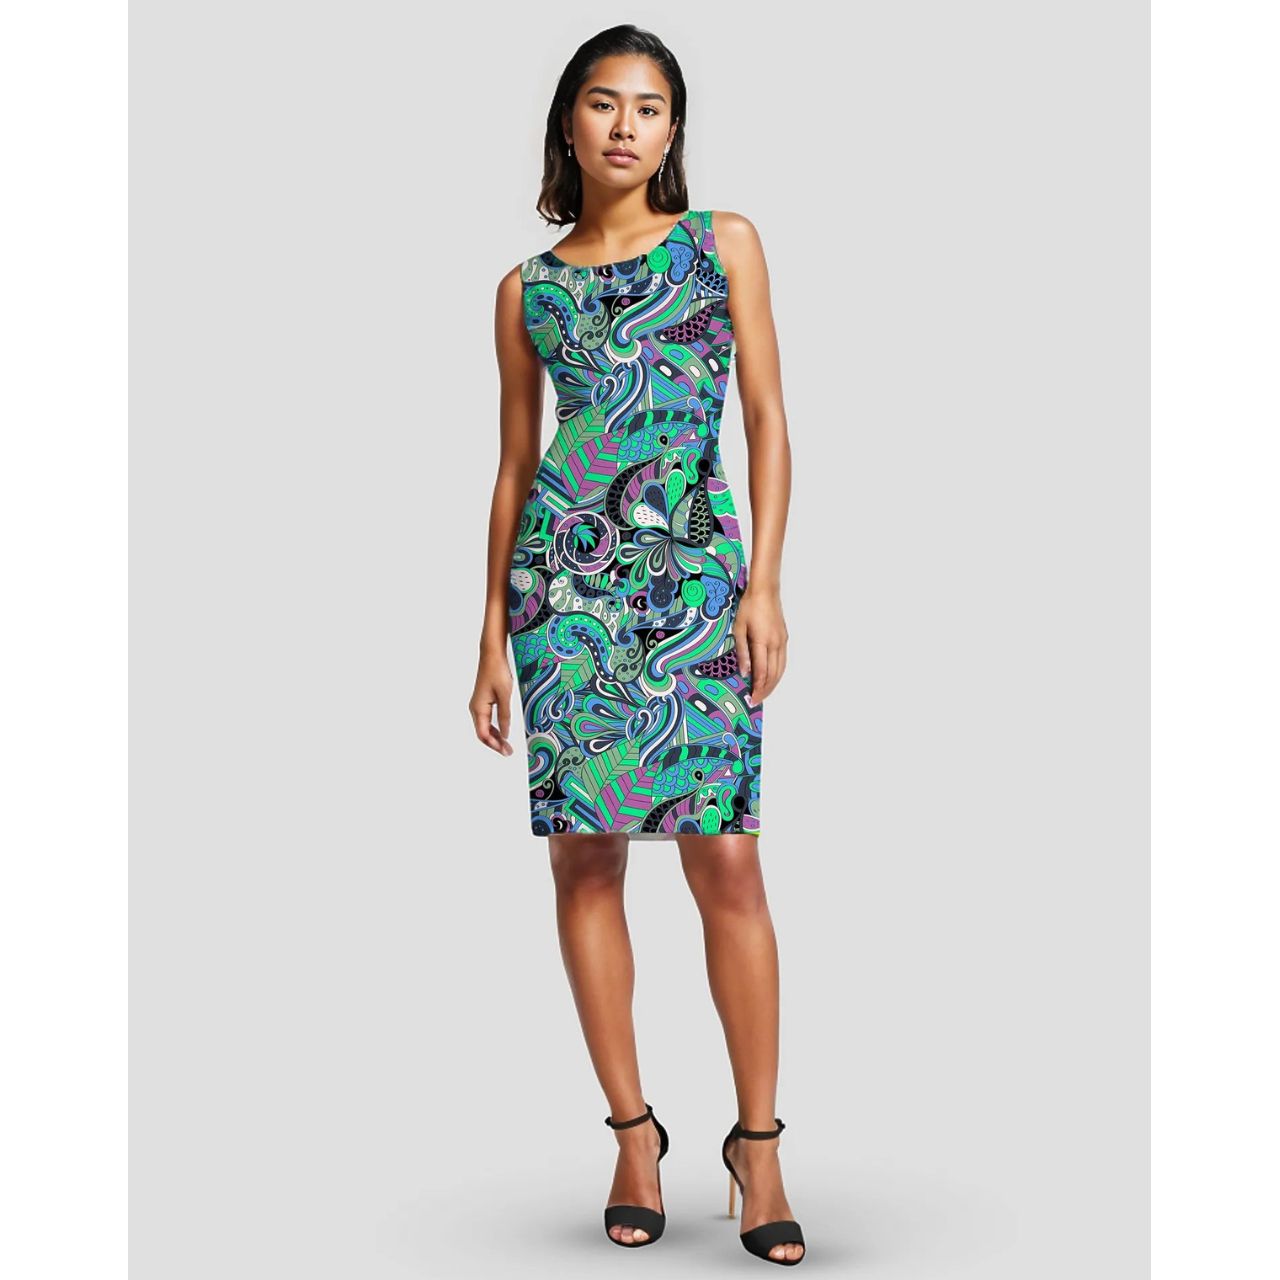 Nela sleeveless above knee-length cocktail sheath dress botanical psychedelic abstract floral paisley swirls retro Designer Print Violet Blue Green Round Neck Form fitted bodycon Blissfully Brand